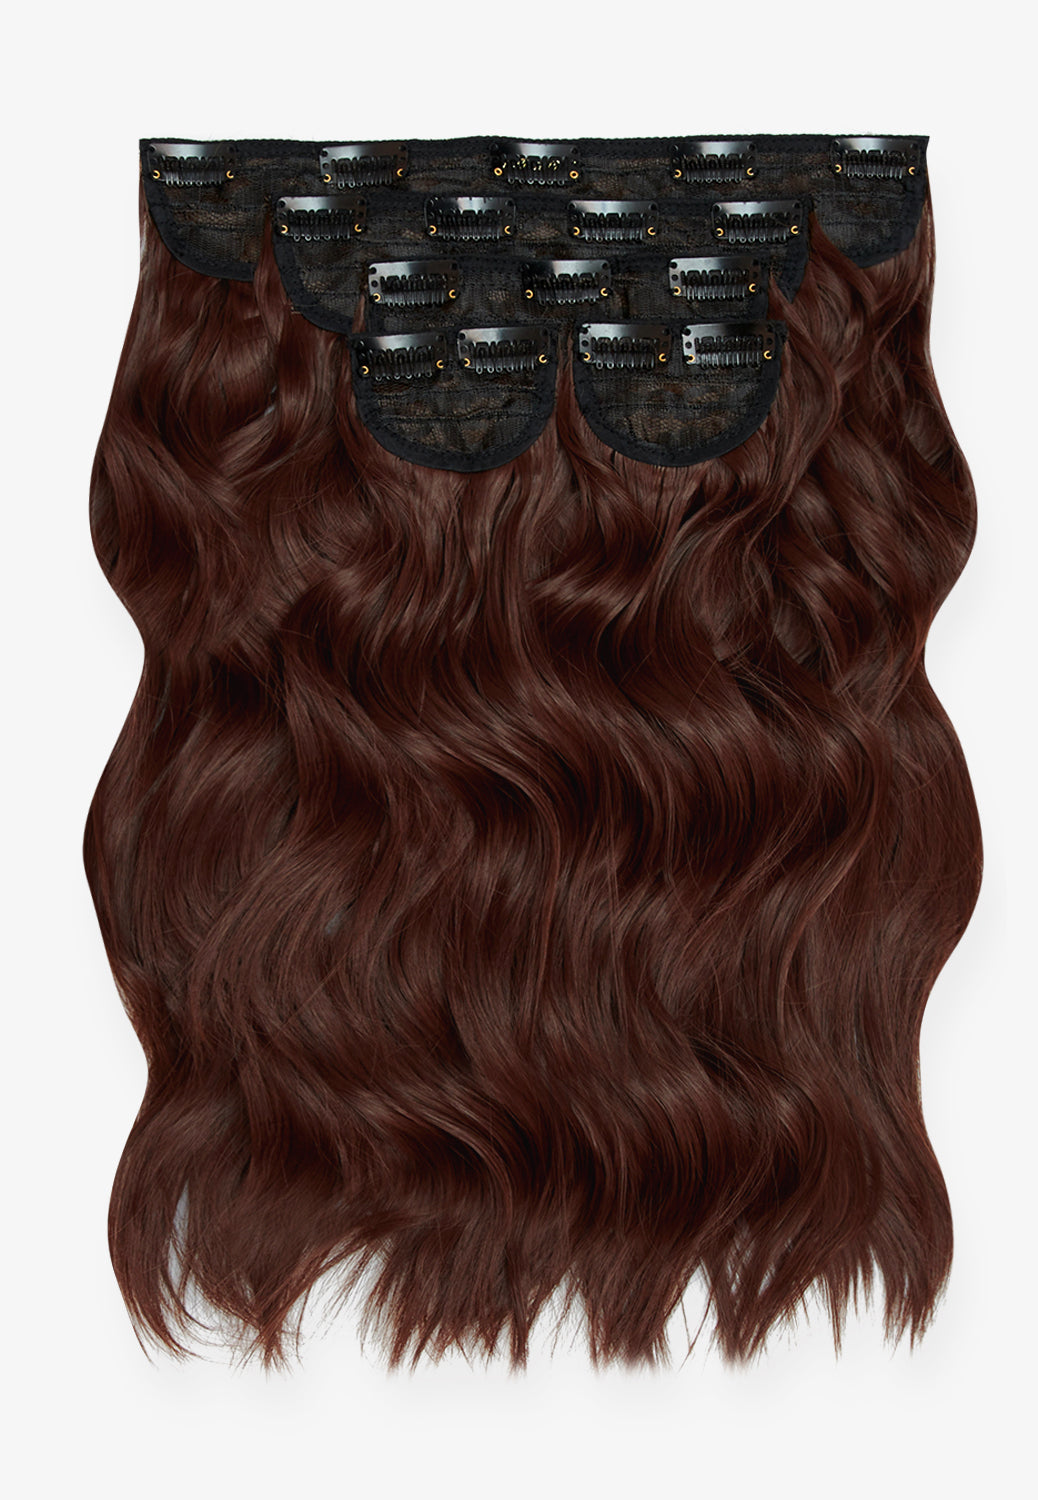 Super Thick 16’’ 5 Piece Brushed Out Wave Clip In Hair Extensions - Warm Brunette